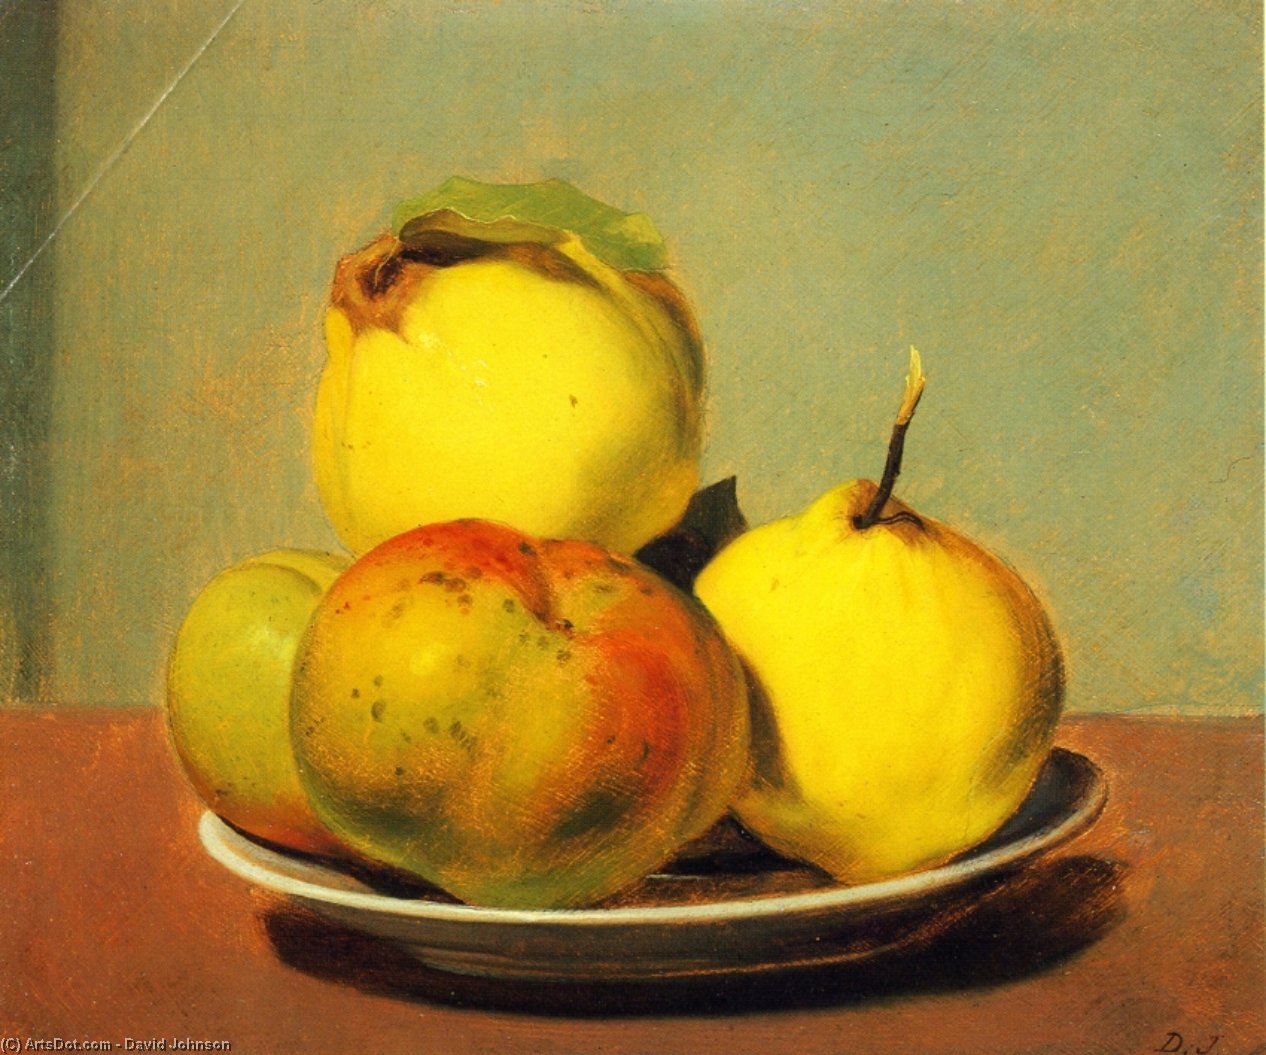 WikiOO.org - 백과 사전 - 회화, 삽화 David Johnson - Dish of Apples and Quinces